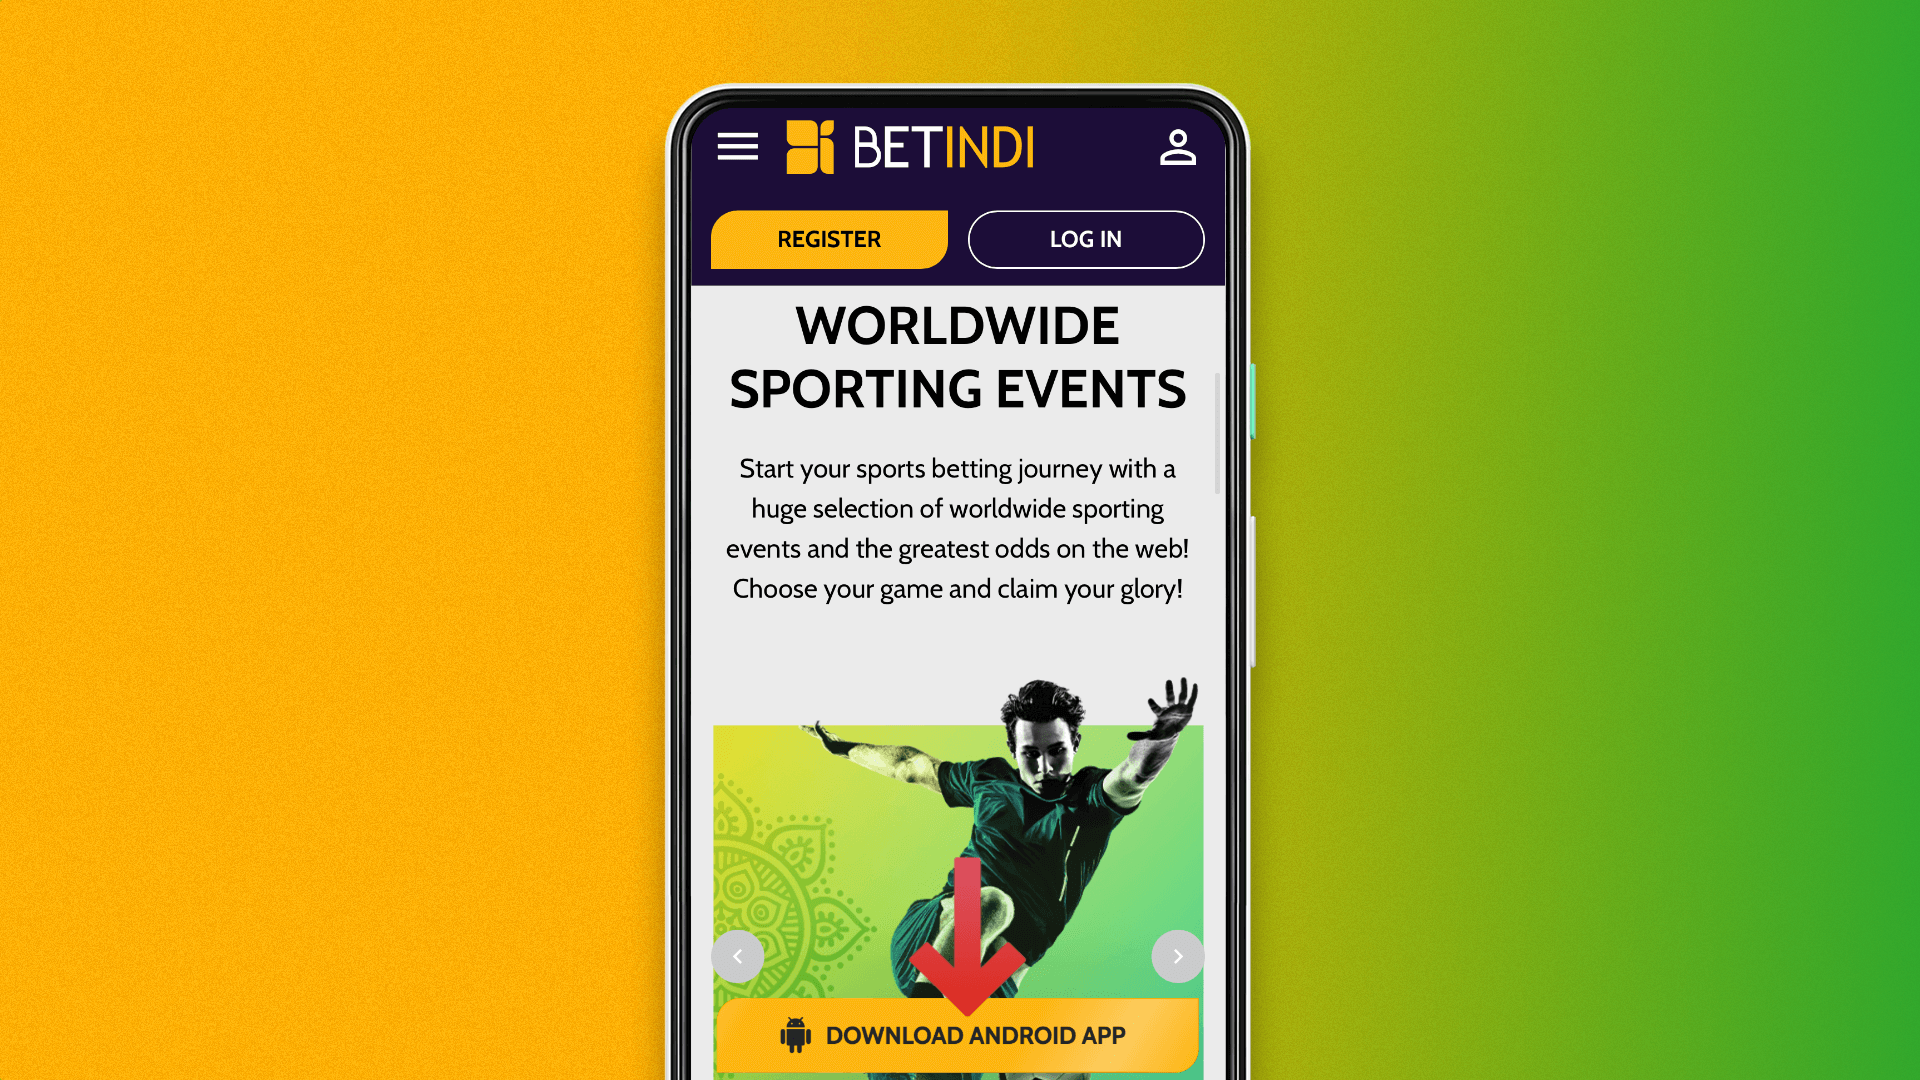 At the bottom of the official Betindi website you can download the app for Android